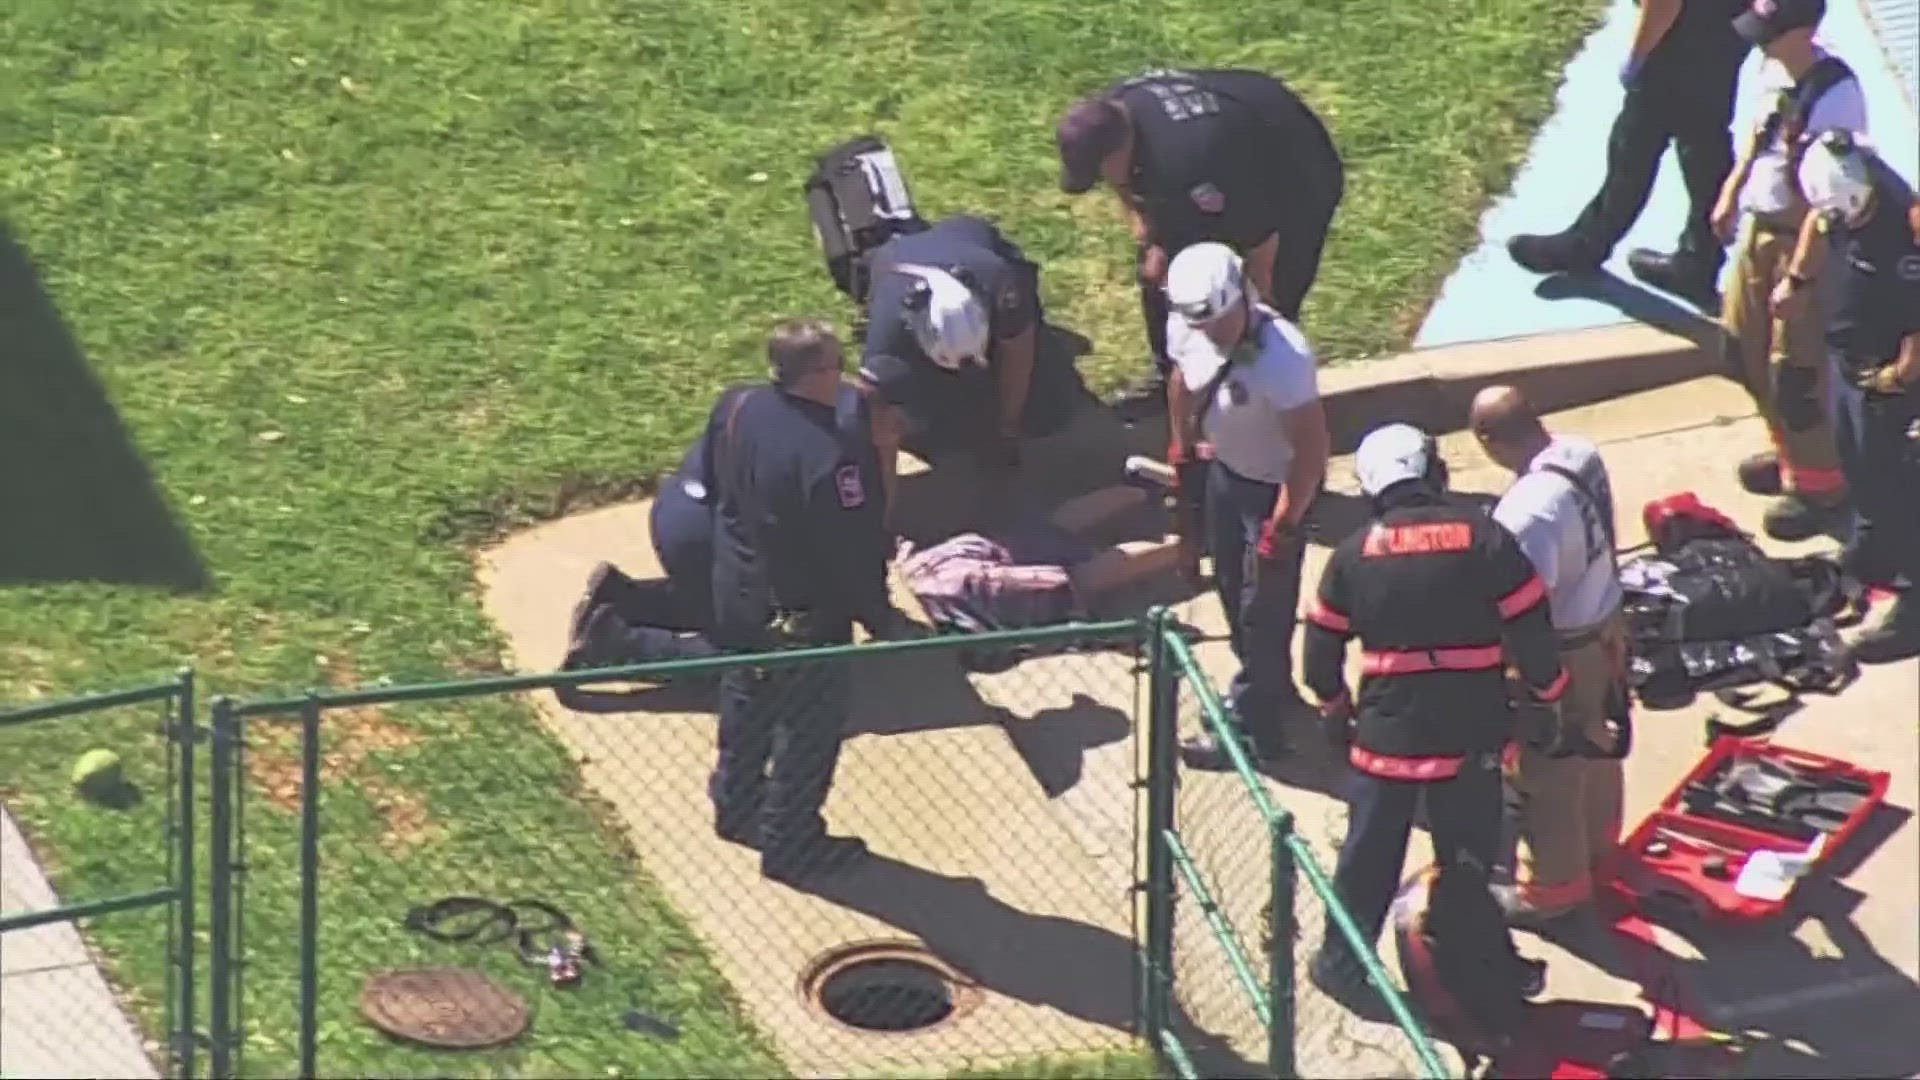 Arlington firefighters worked for over an hour to free the student -- and retrieve the apron.